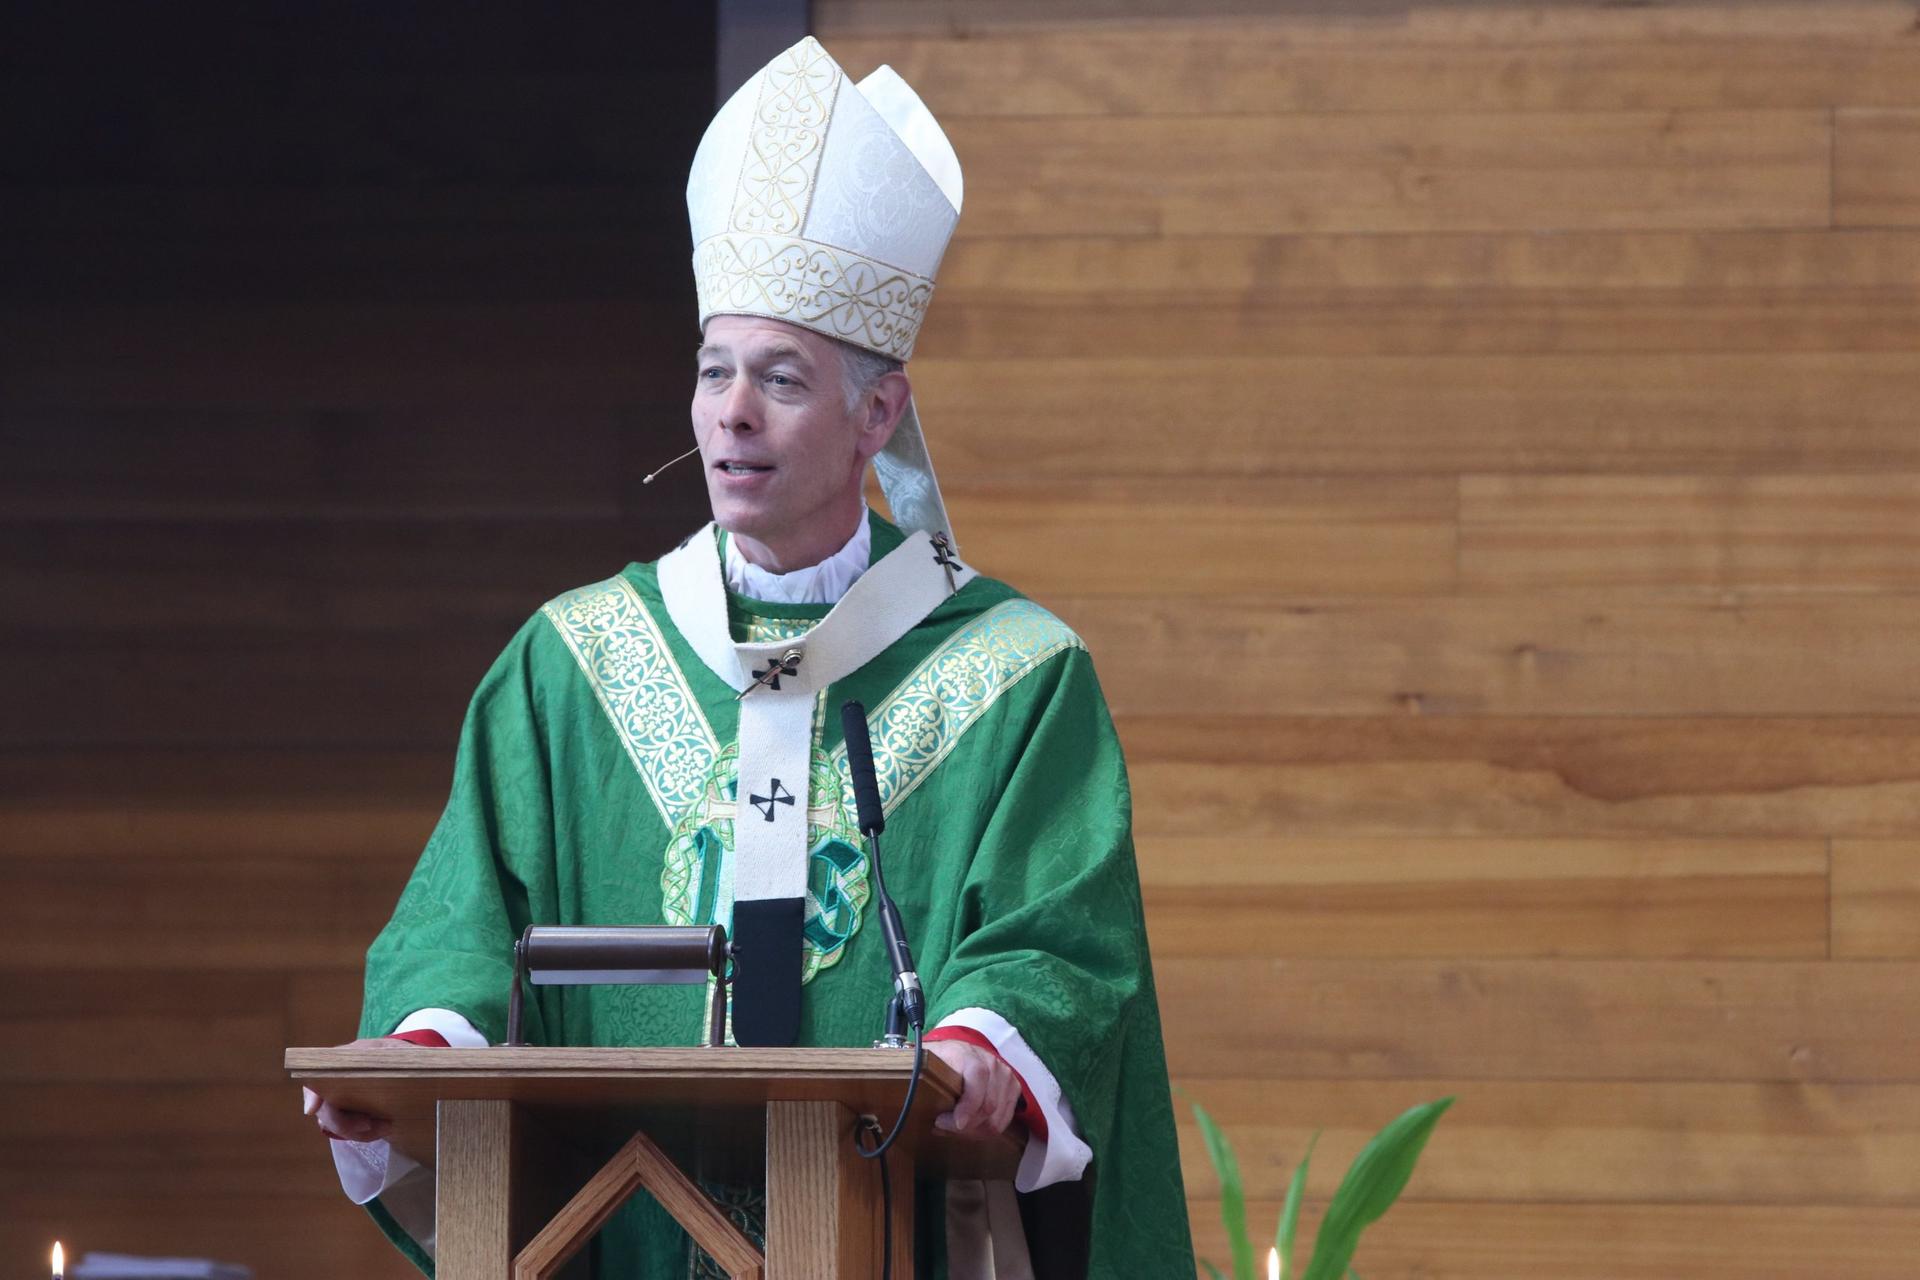 Oregon archbishop shows frustration over new state limits on faith gatherings